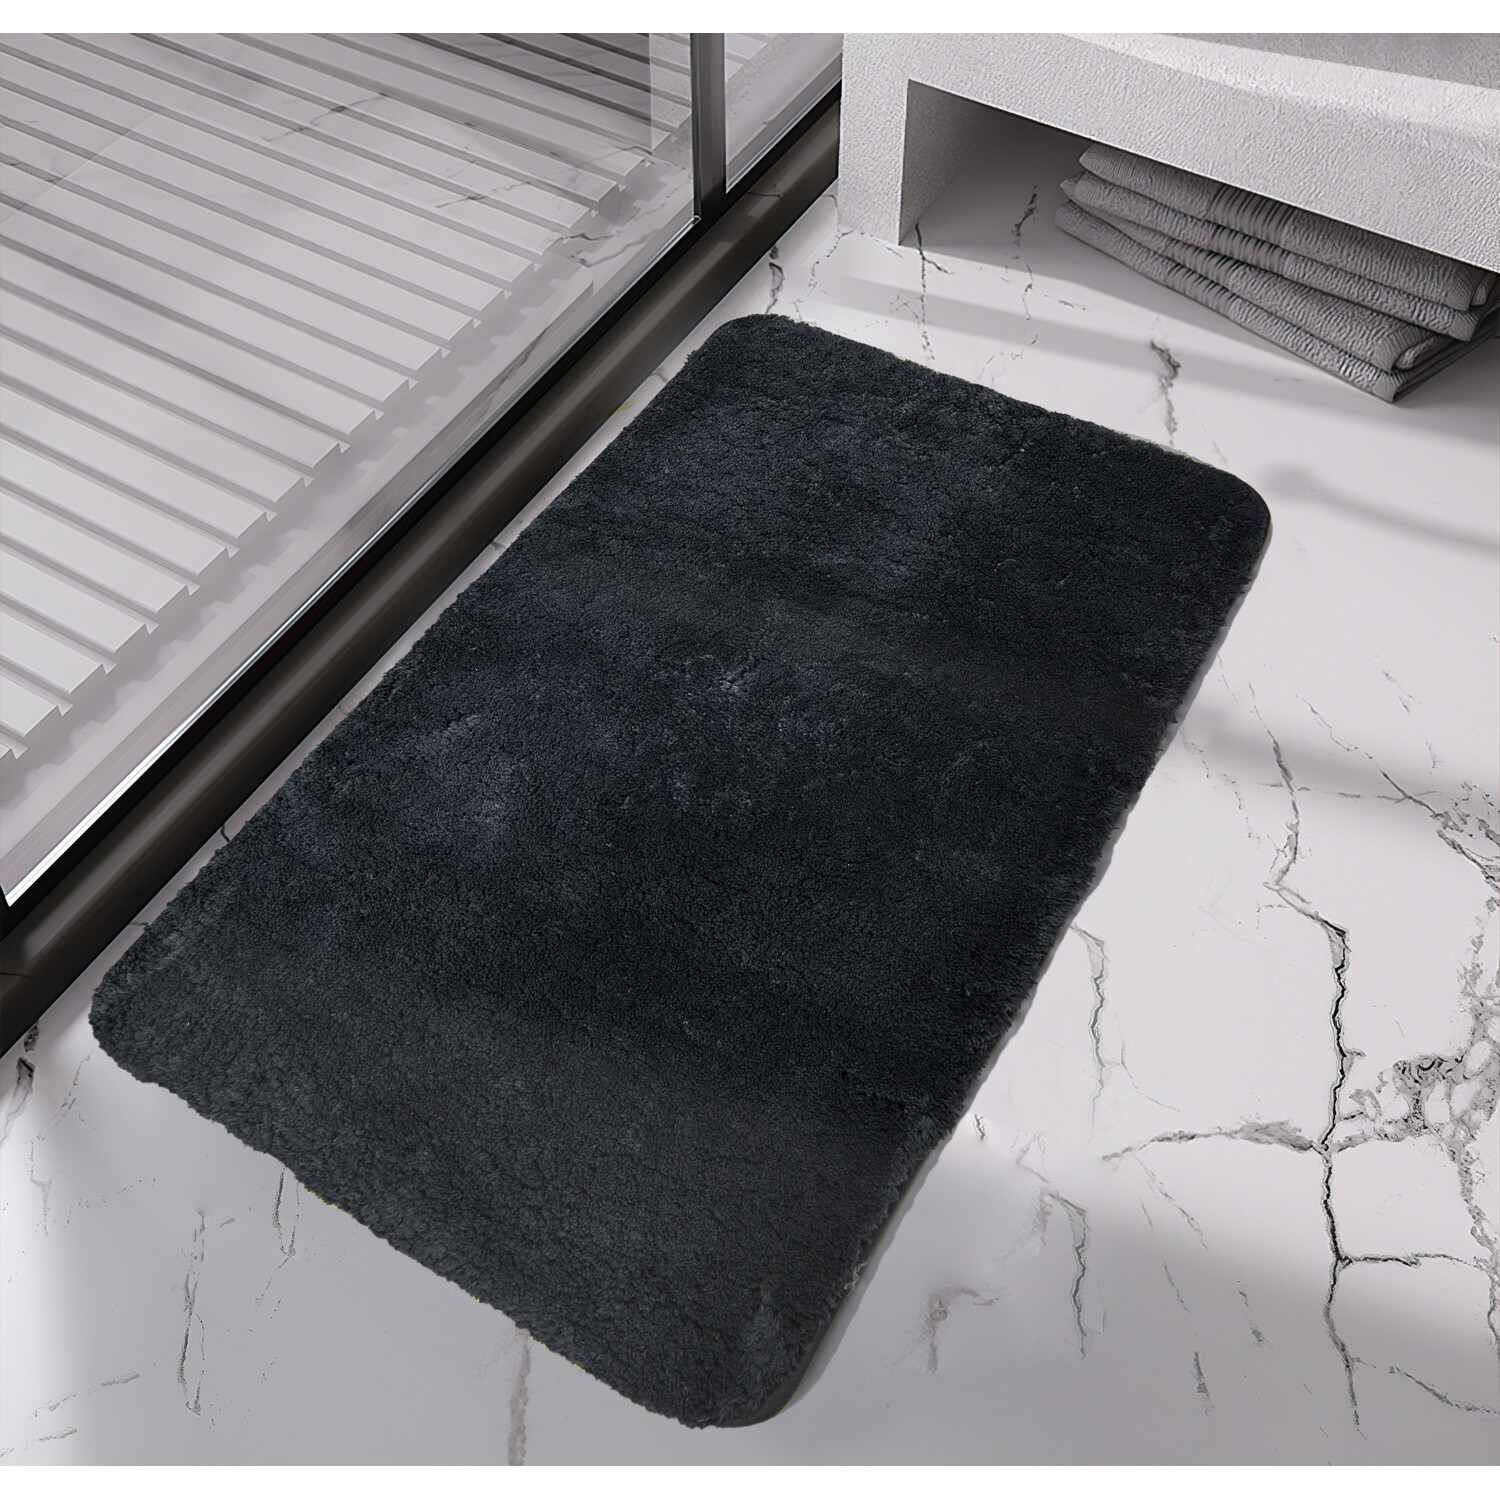 Charcoal Polyester Supersoft Bath Mat 45 x 75cm Image 2